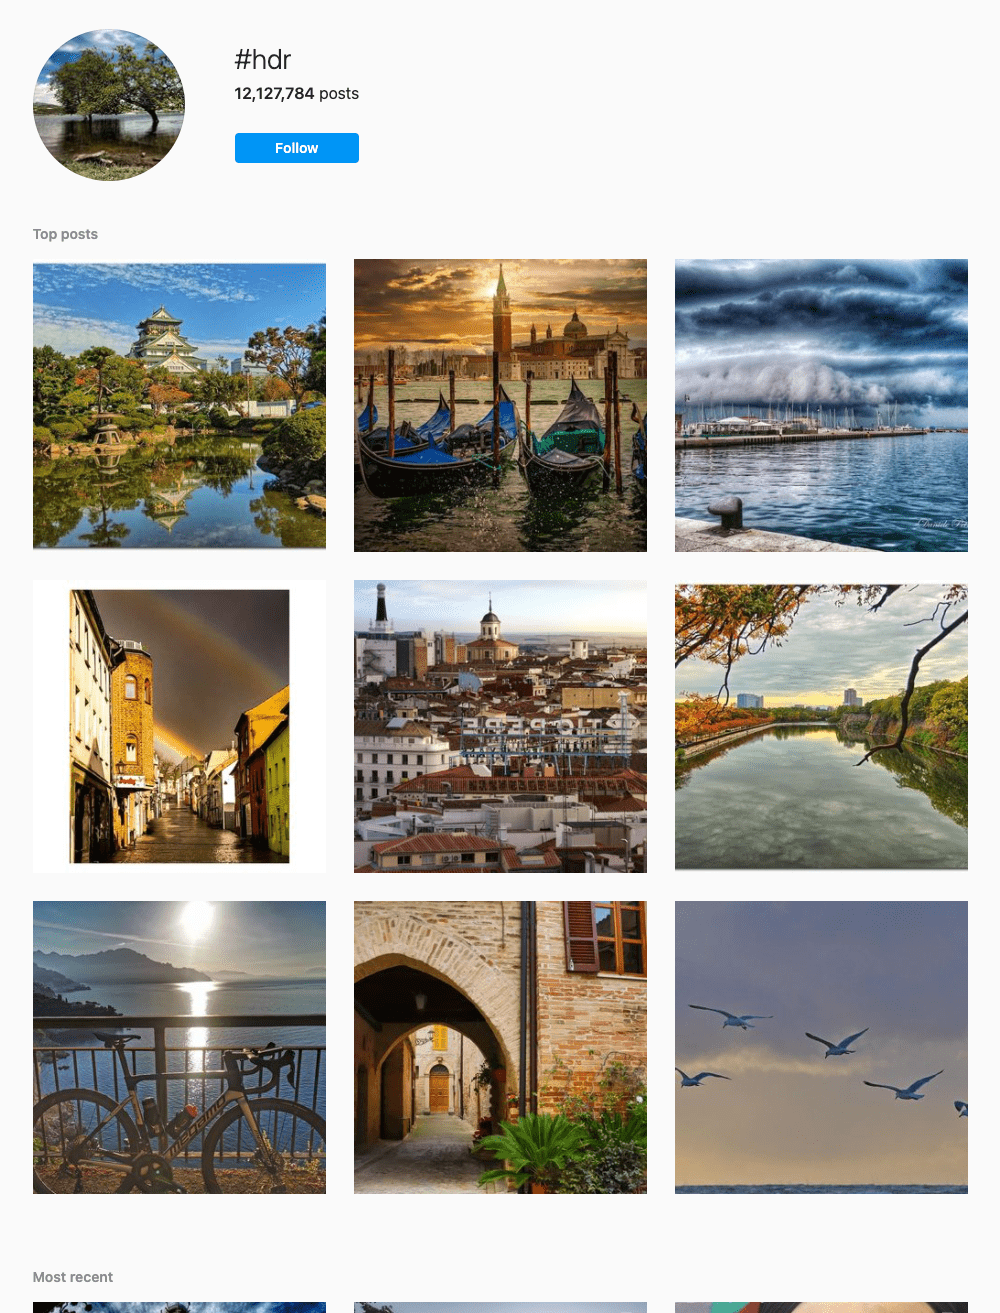 #hdr Hashtags for Instagram